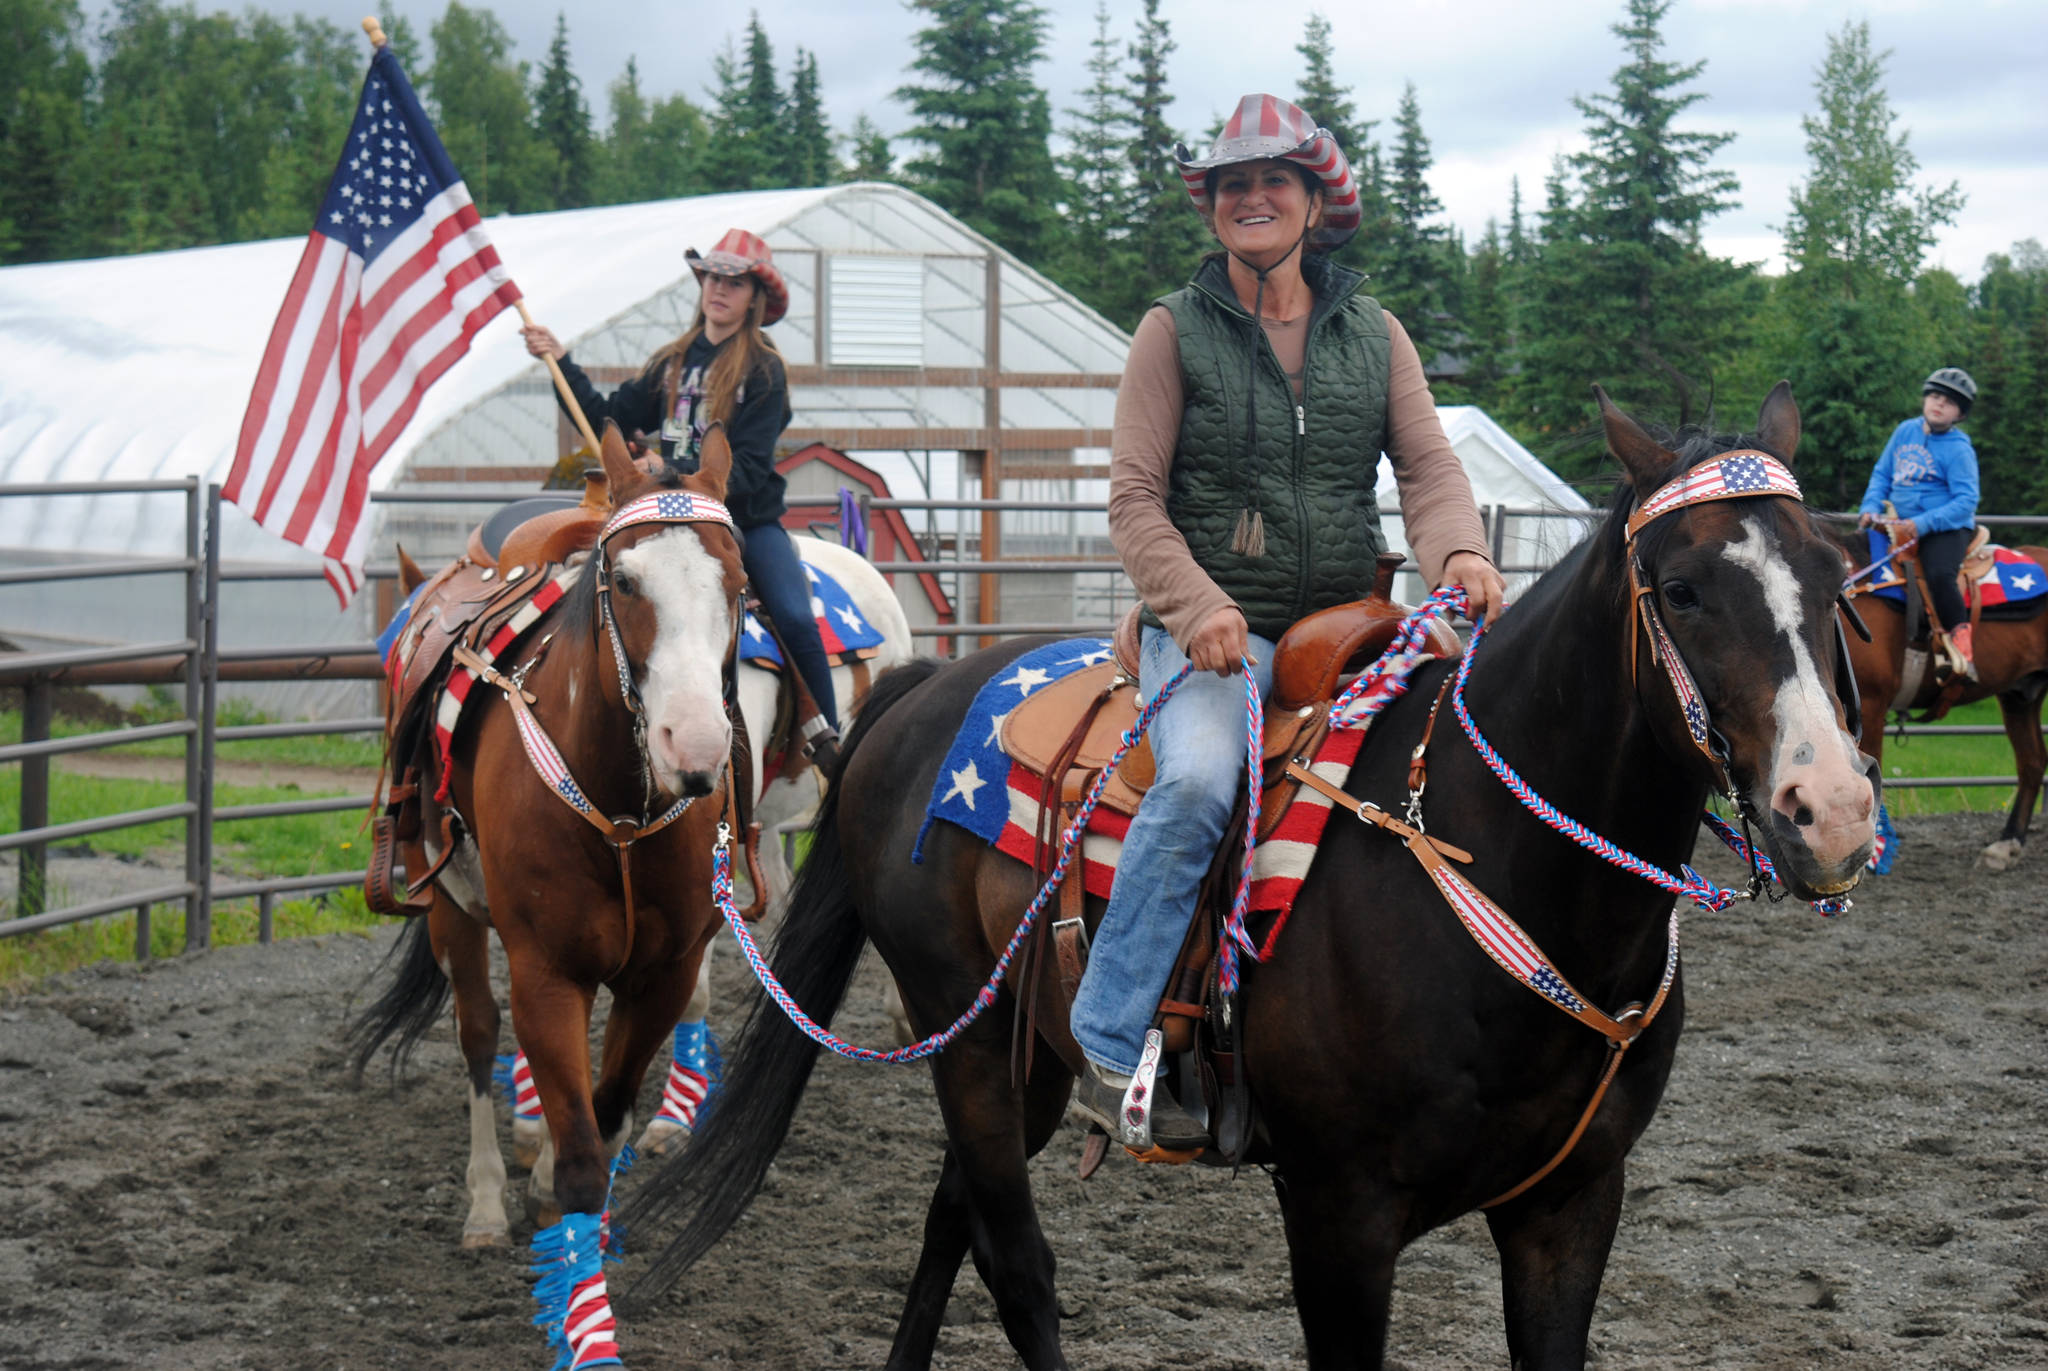 Connie Green, right, owner of Alaska C&C Horse Adventures in Soldotna, practices with Madelyn Barkman, left, on Monday in preparation for the Kenai Fourth of July Parade. (Photo by Kat Sorensen/Peninsula Clarion)